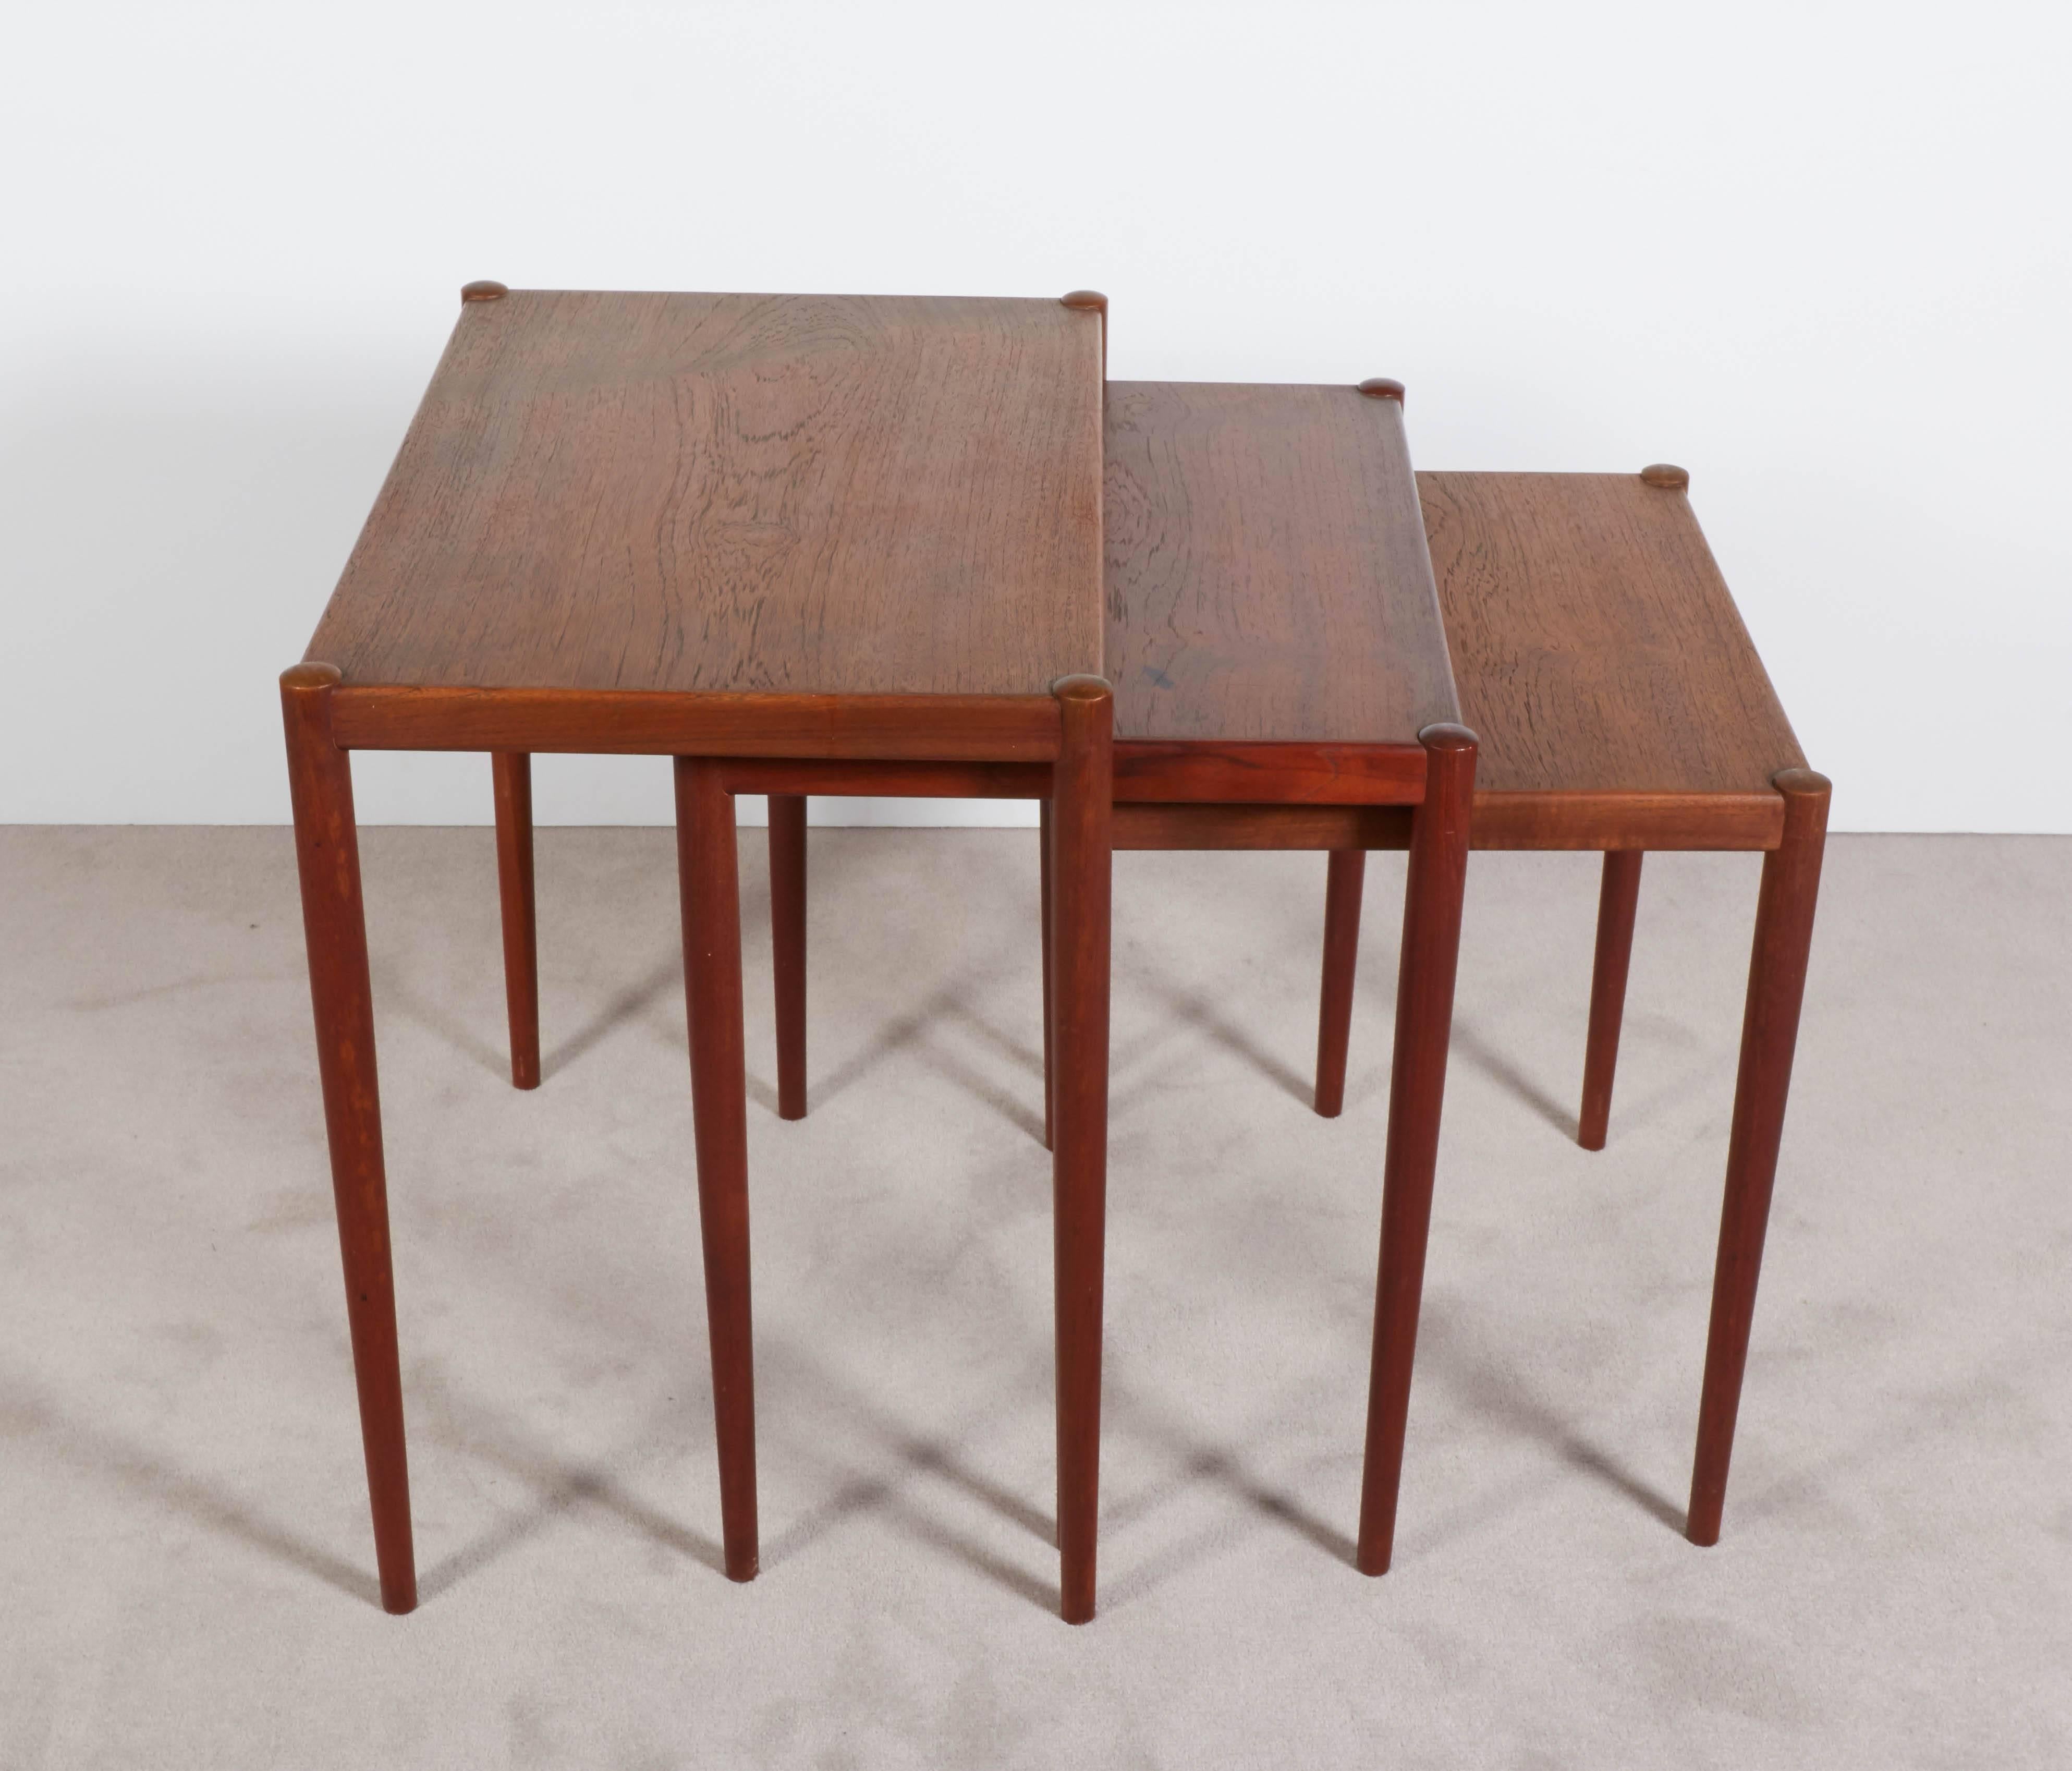 Danish, circa 1960s nesting tables by Poul Jensen, designed in the Scandinavian Modern style, entirely in teak on tapered legs. Markings include manufacturer's label, signed [P. Jensen] to the underside of the tabletop. Very good condition, minimal